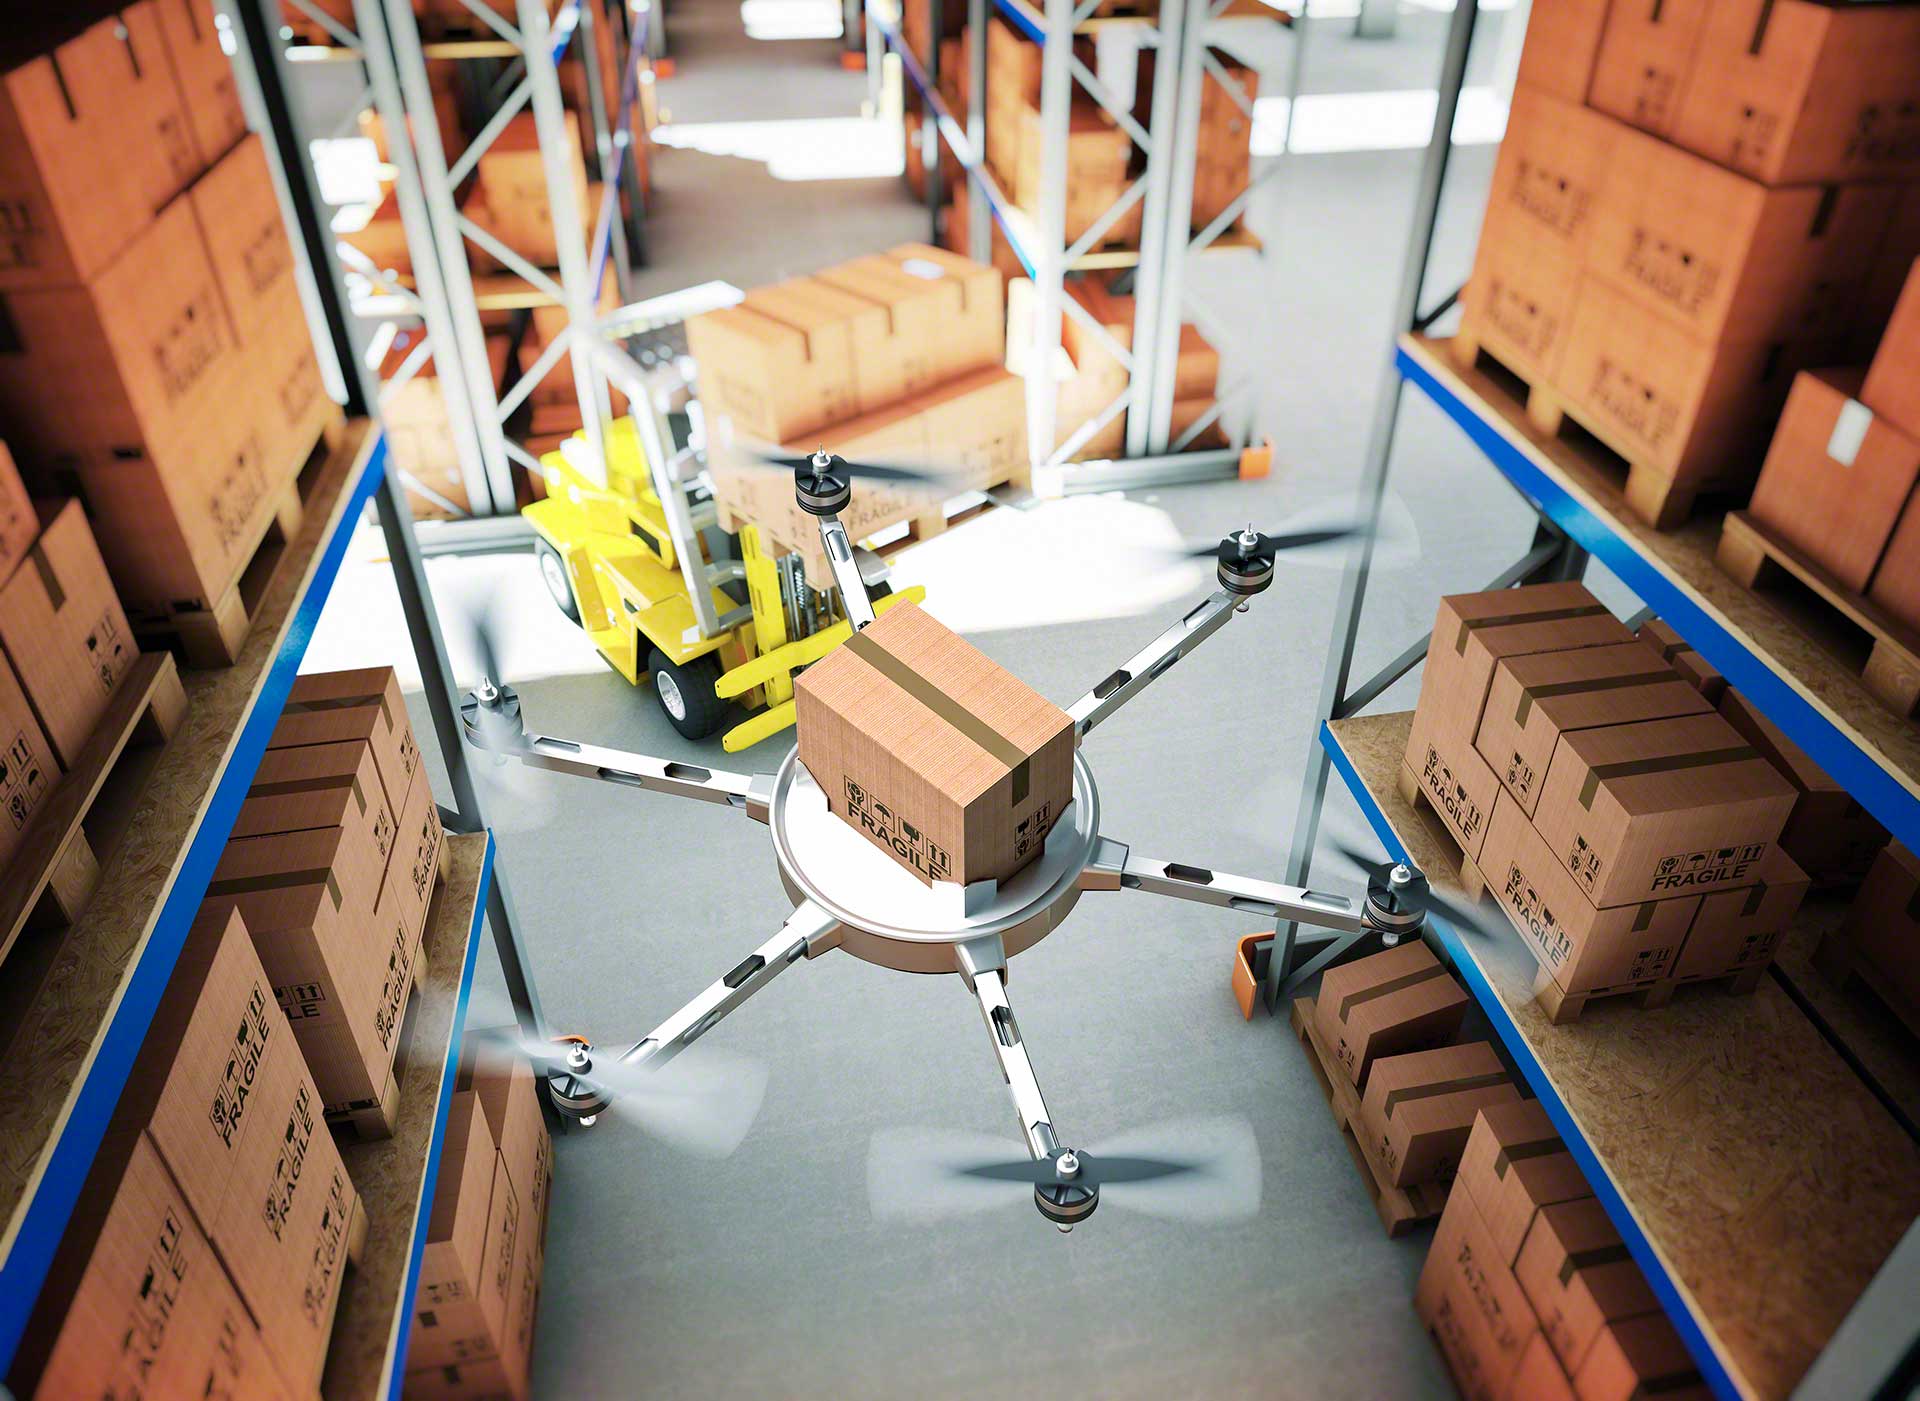 Drones take off in the logistics sector